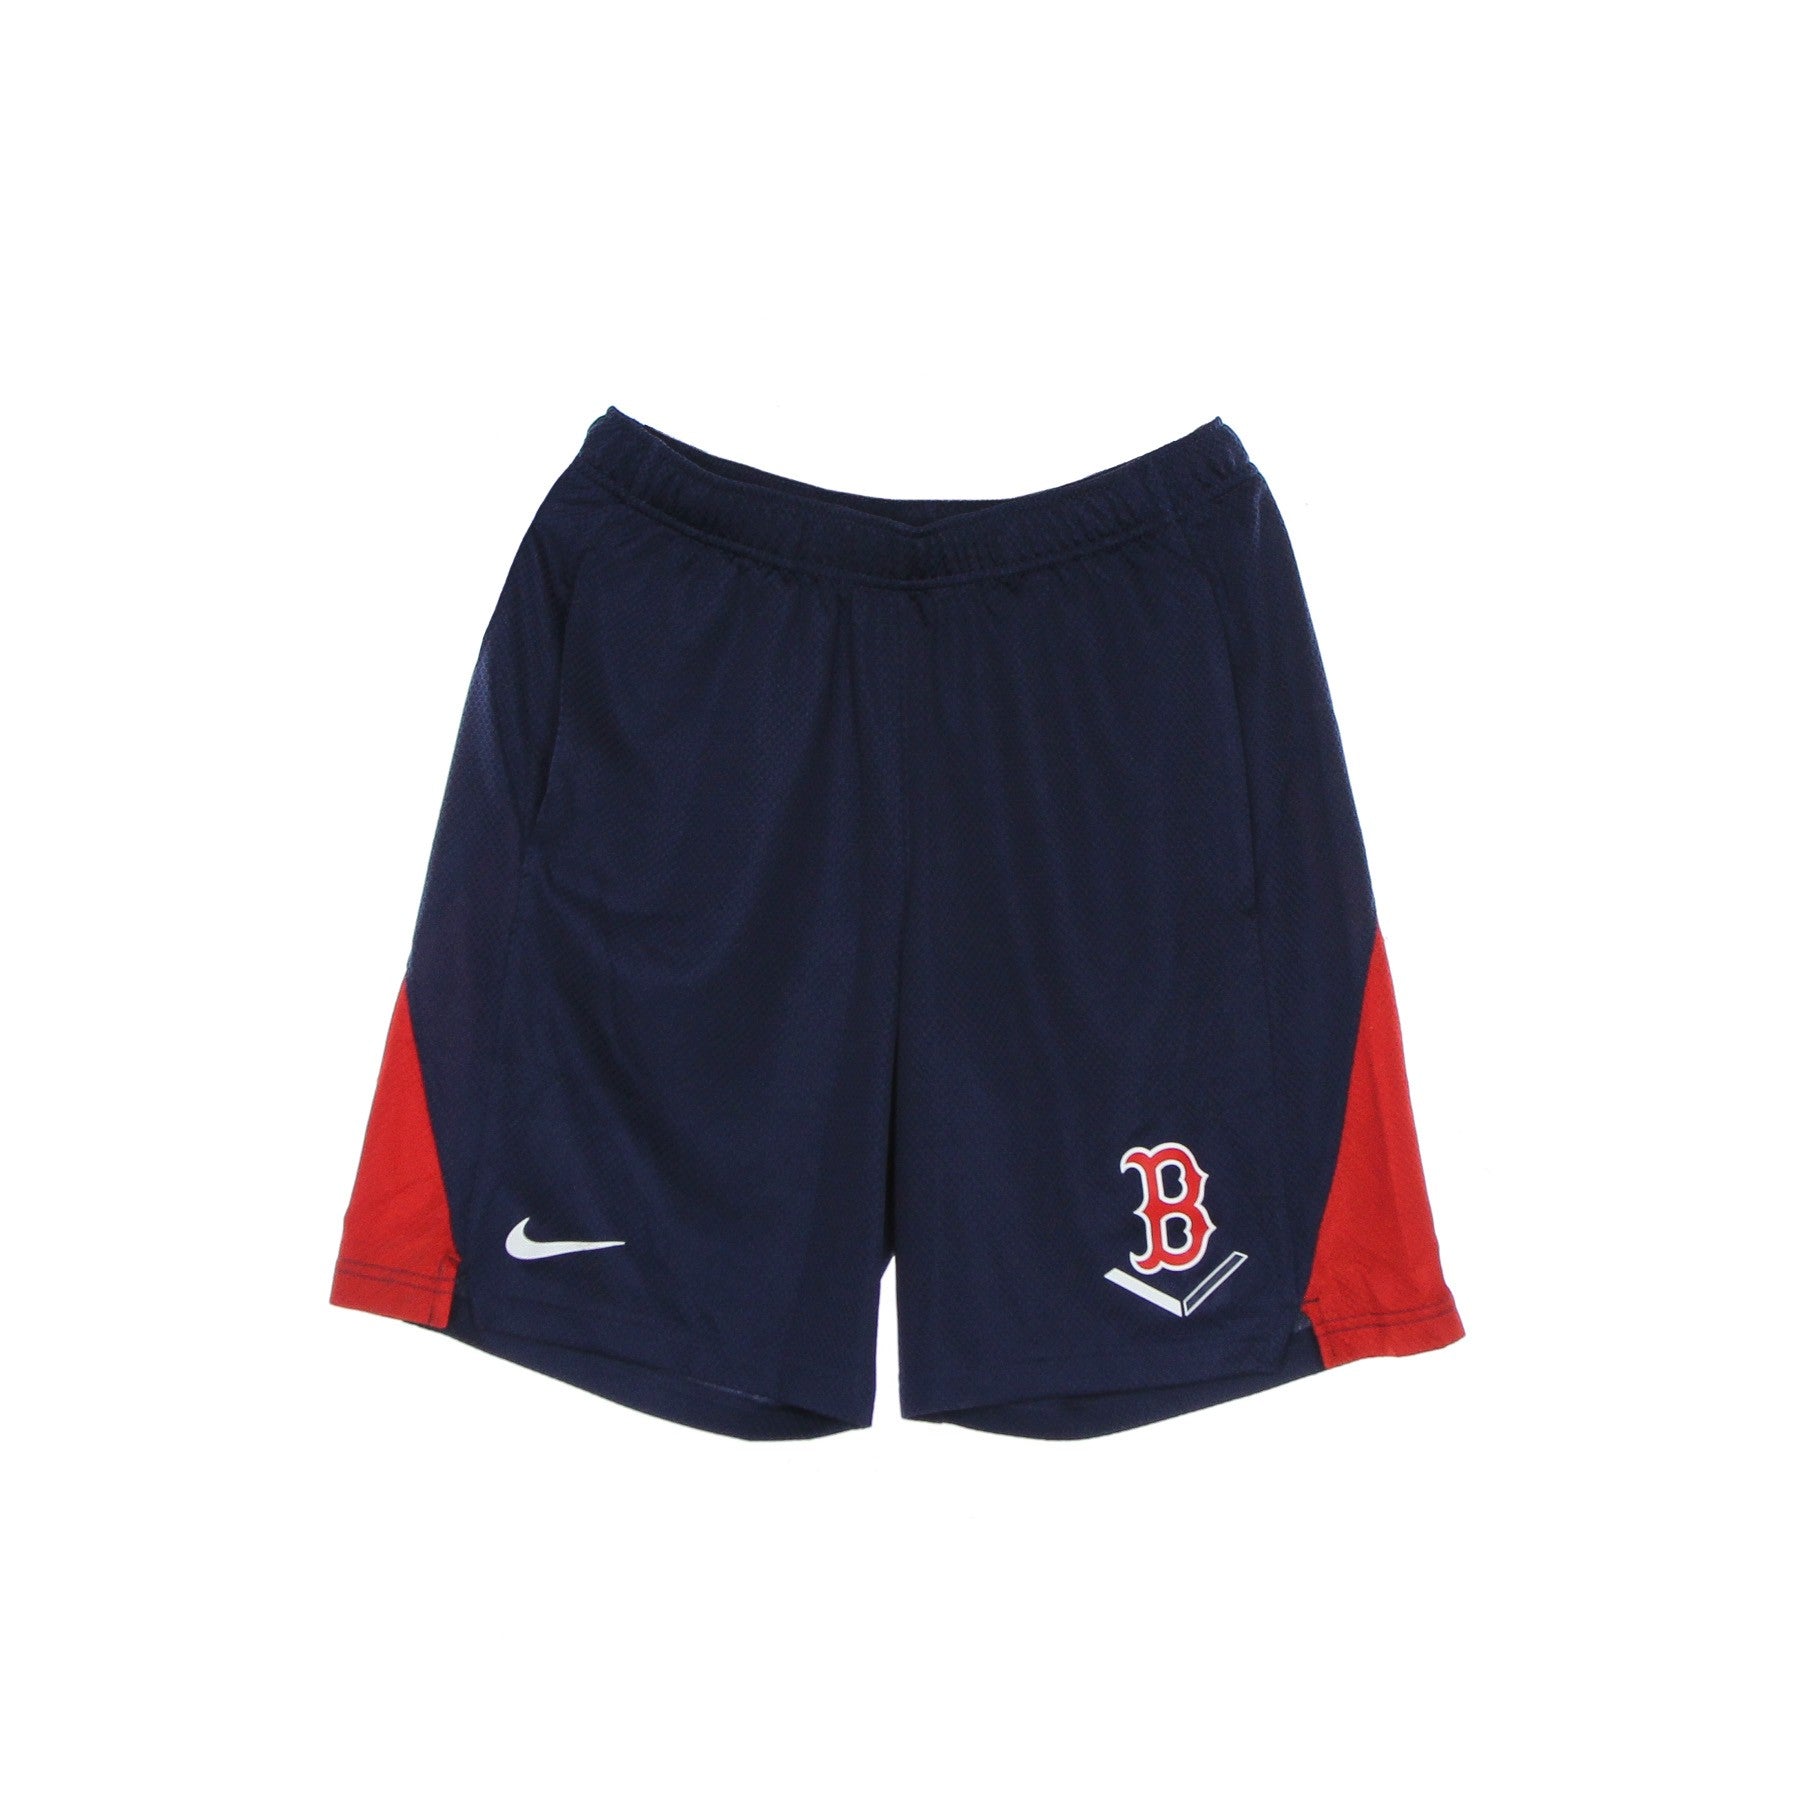 Pantaloncino Tipo Basket Uomo Mlb Home Plate Franchise Performance Shorts Bosred Midnight Navy/sport Red